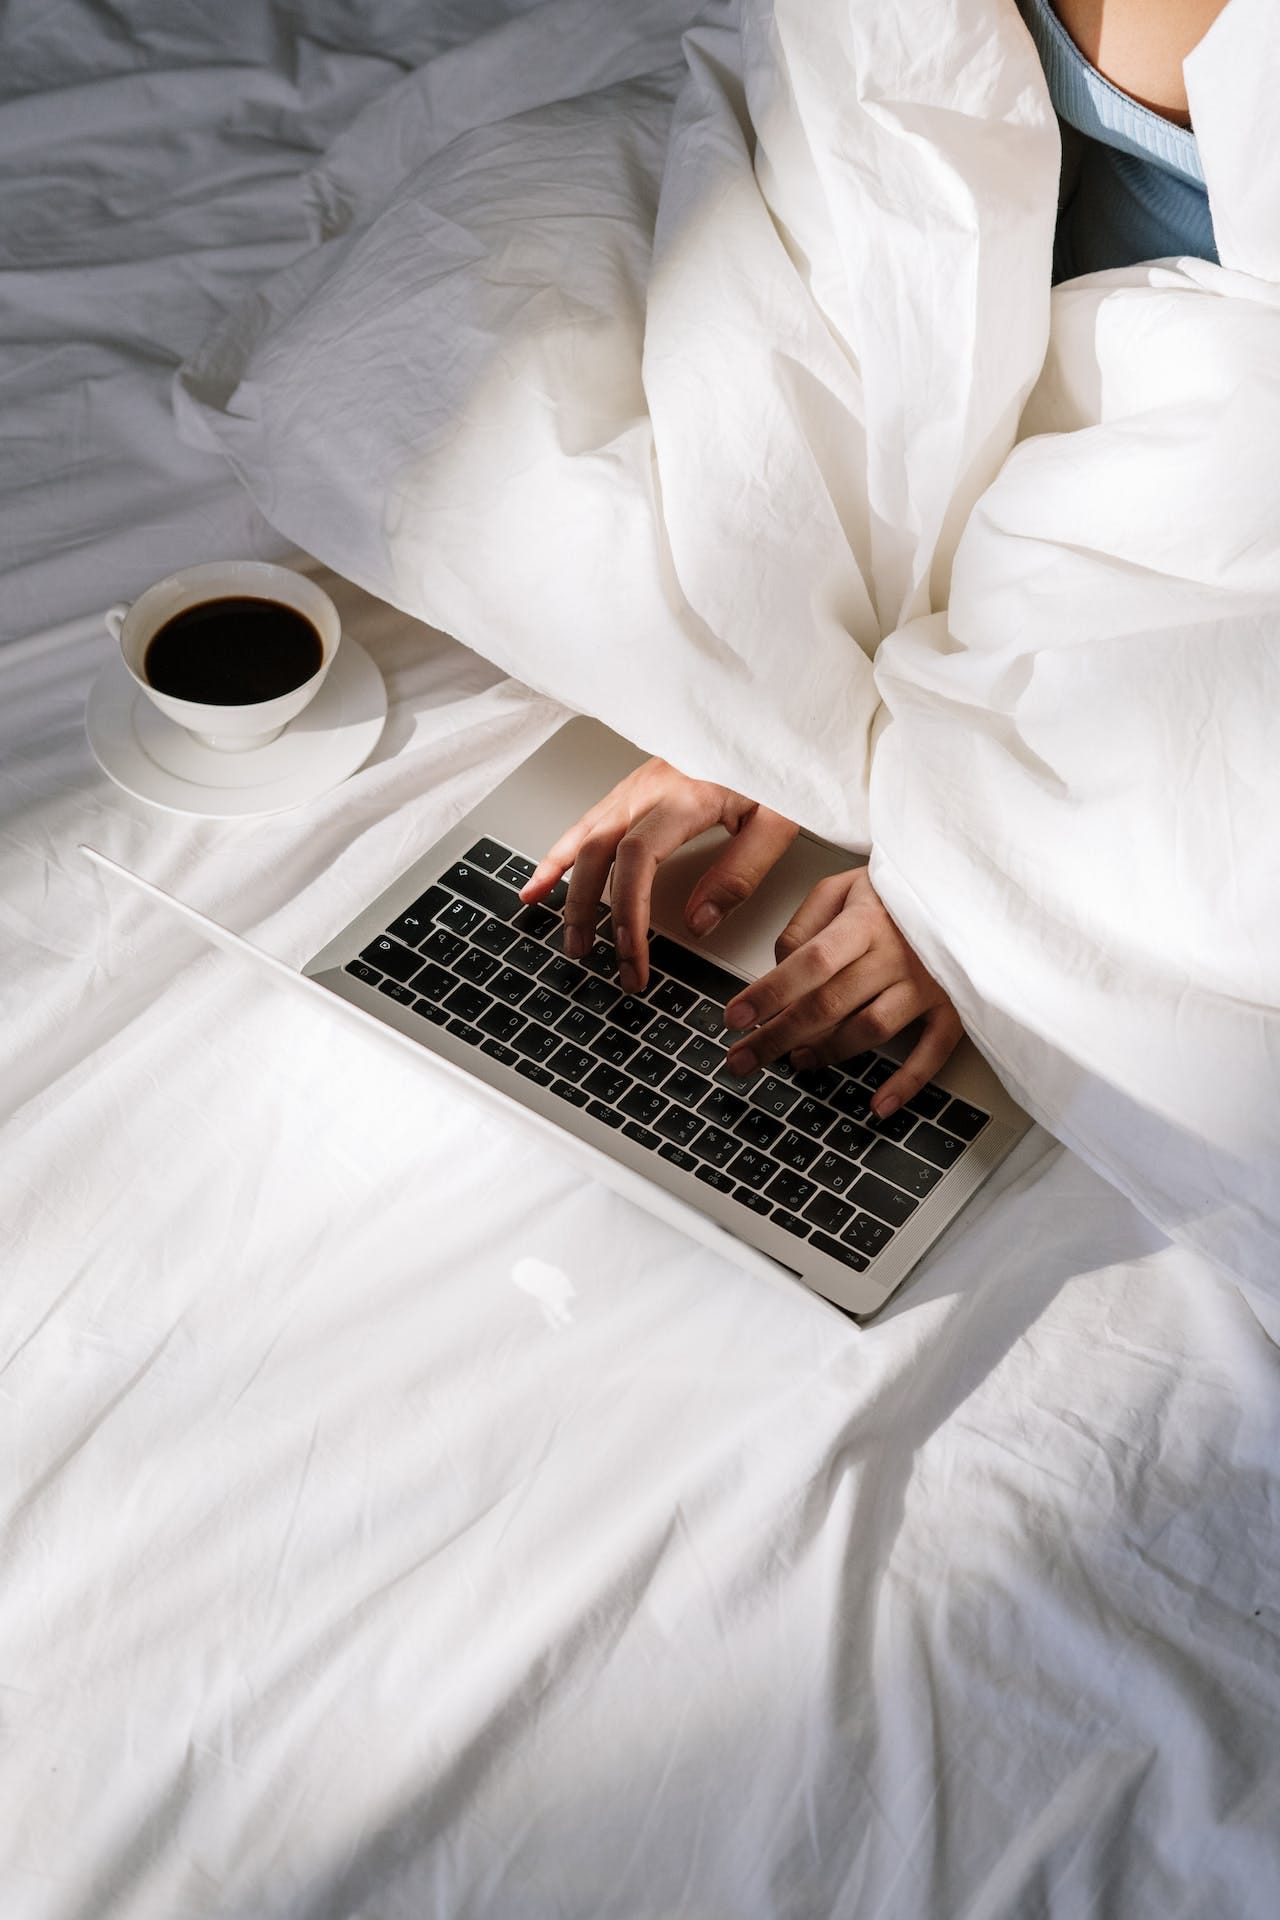 person typing on computer while under sheets of bed with coffee